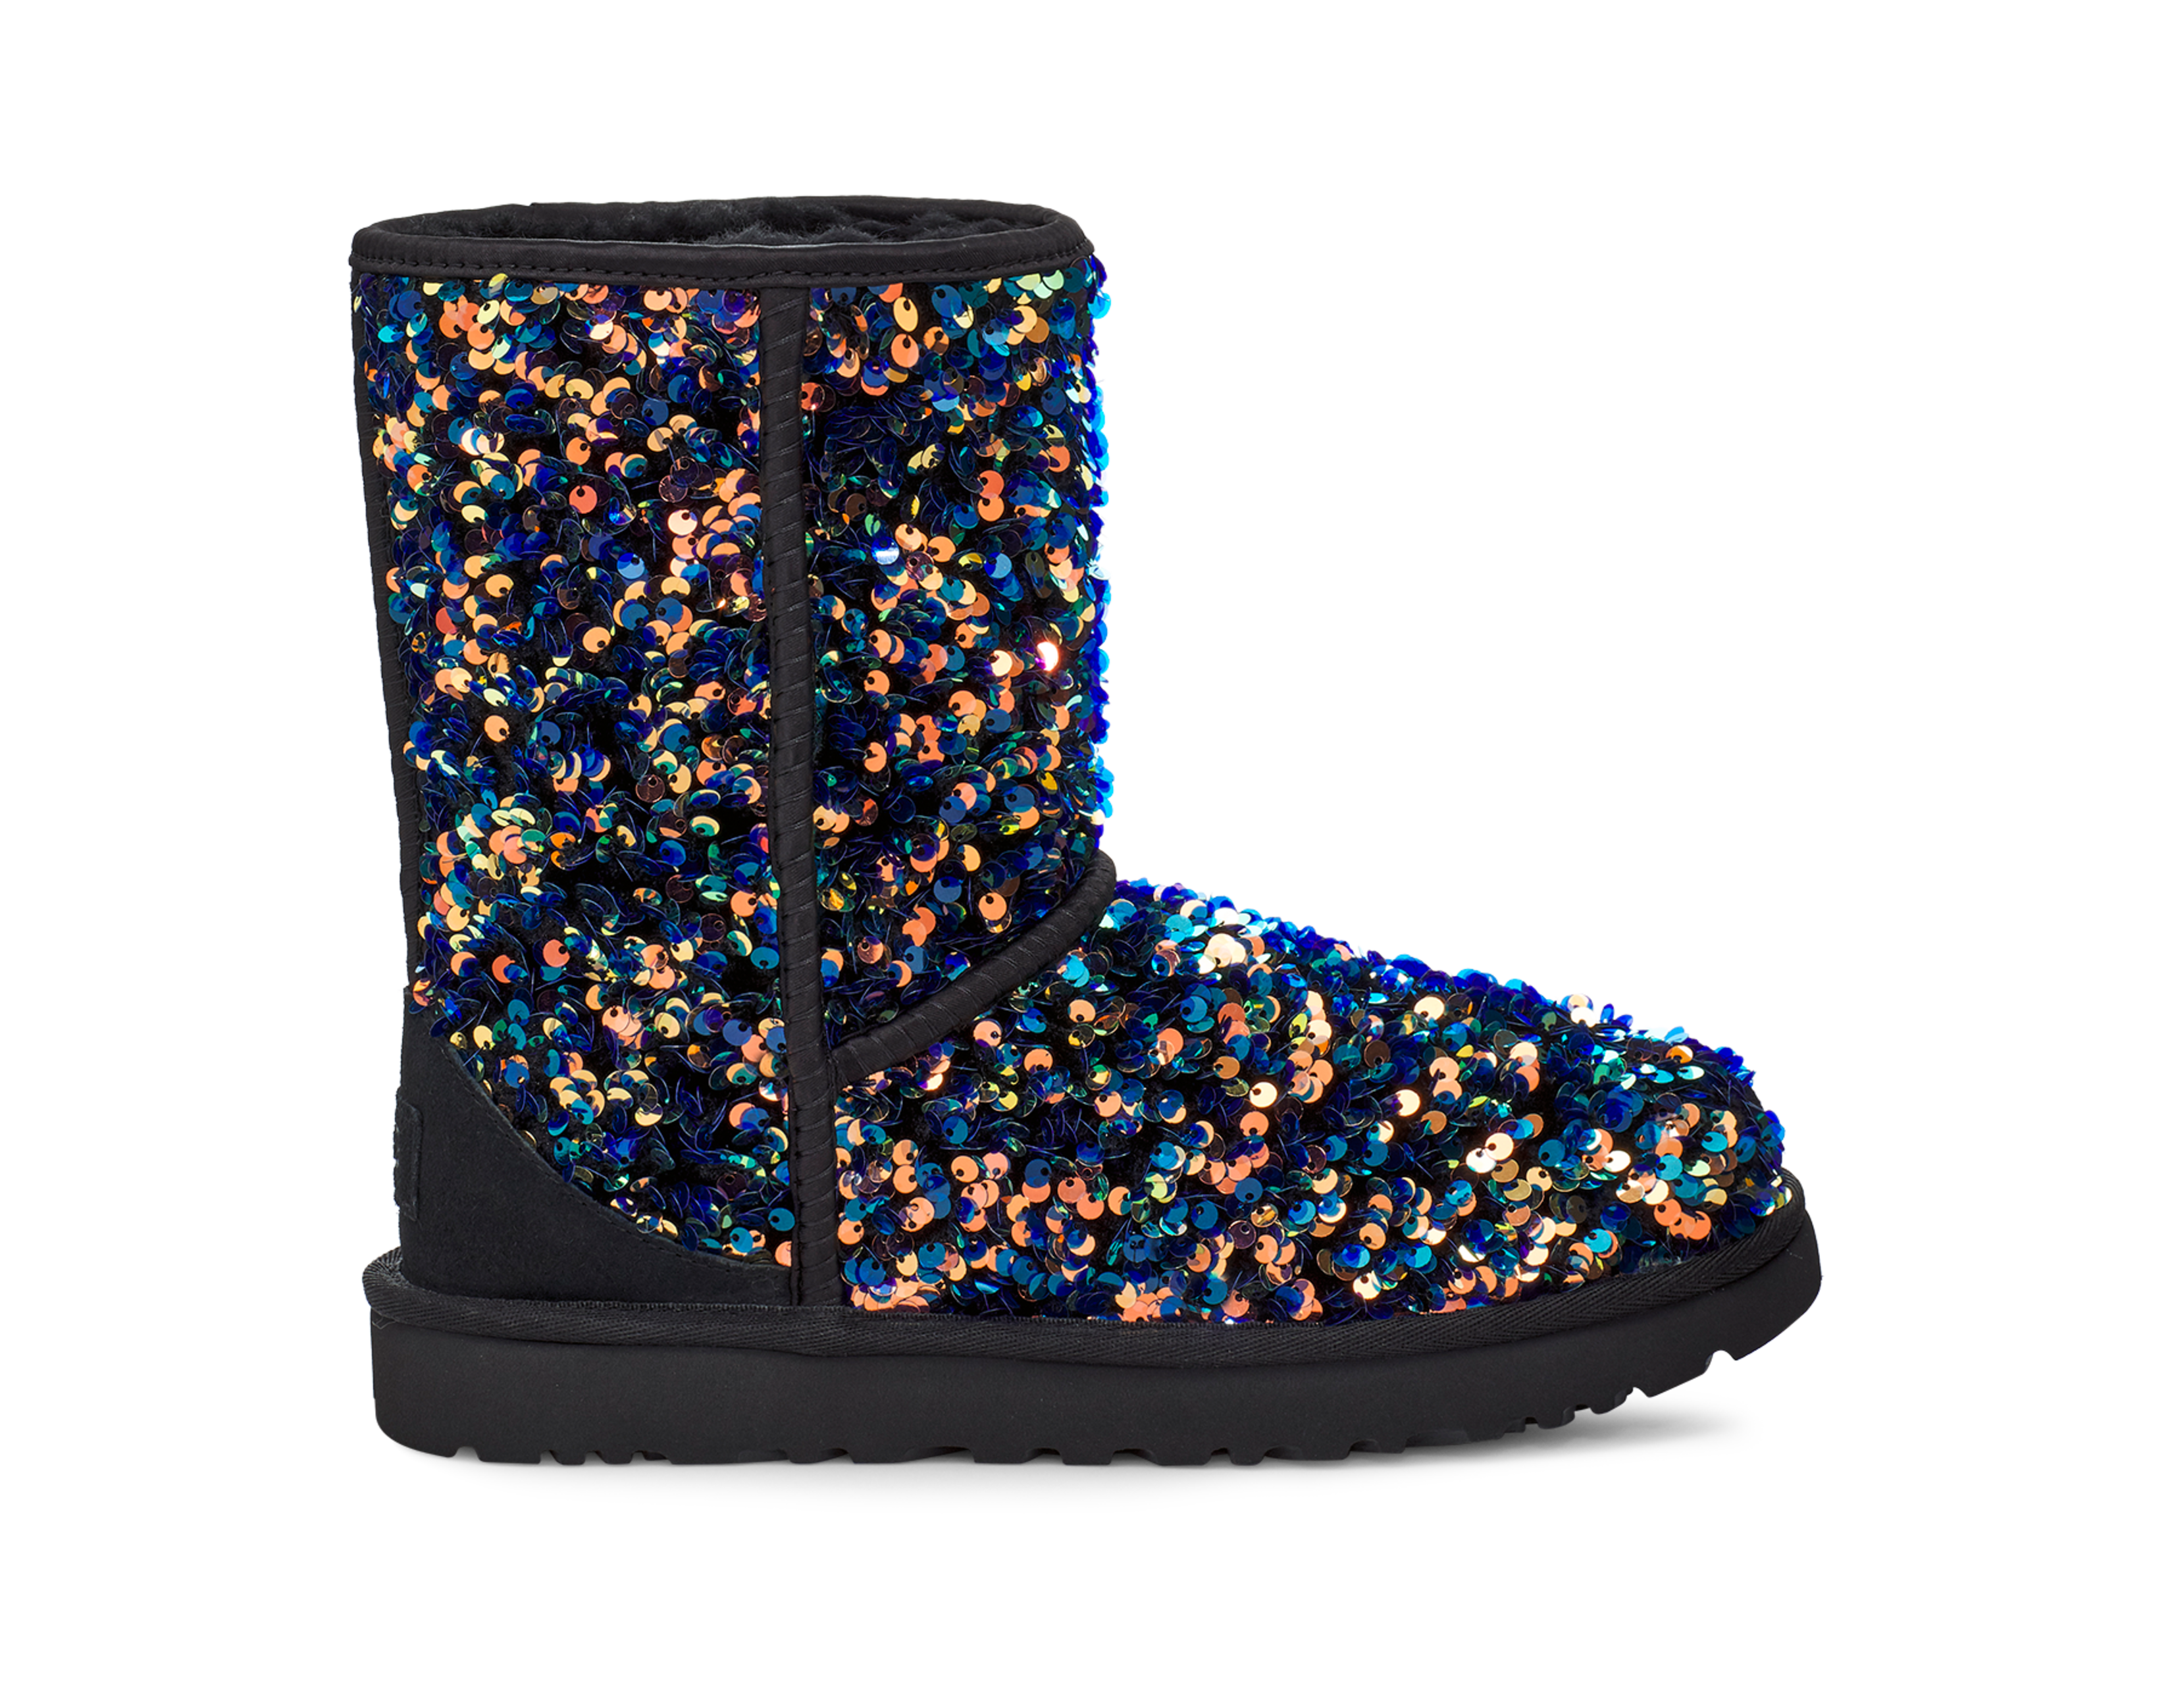 UGG Sequin Boots Silver Size 8 - $46 (72% Off Retail) - From Lily